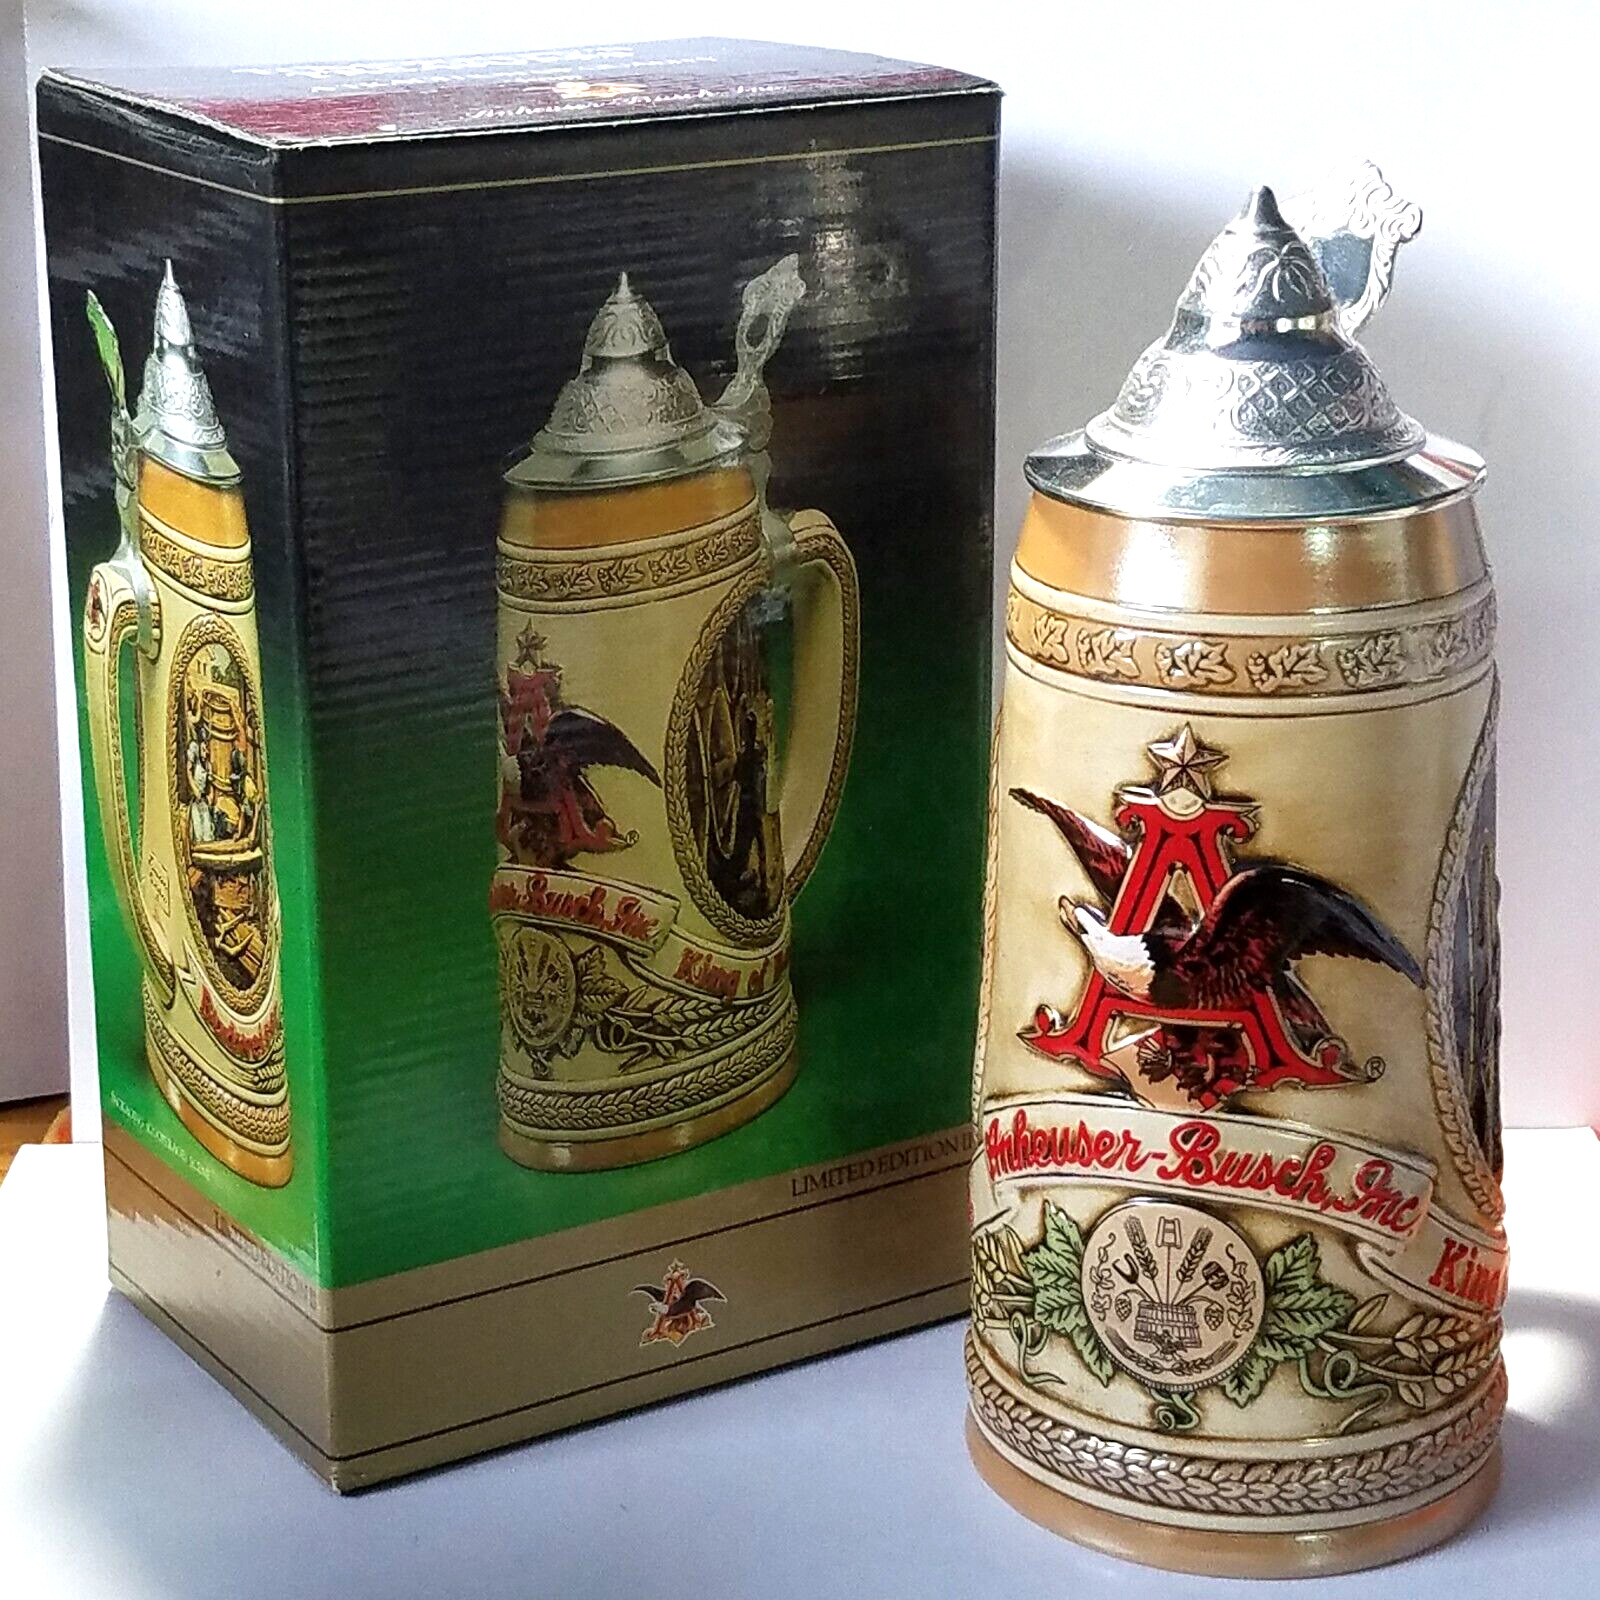 1986 Budweiser Anheuser-Busch History of Brewing Series Limited Edition II Stein